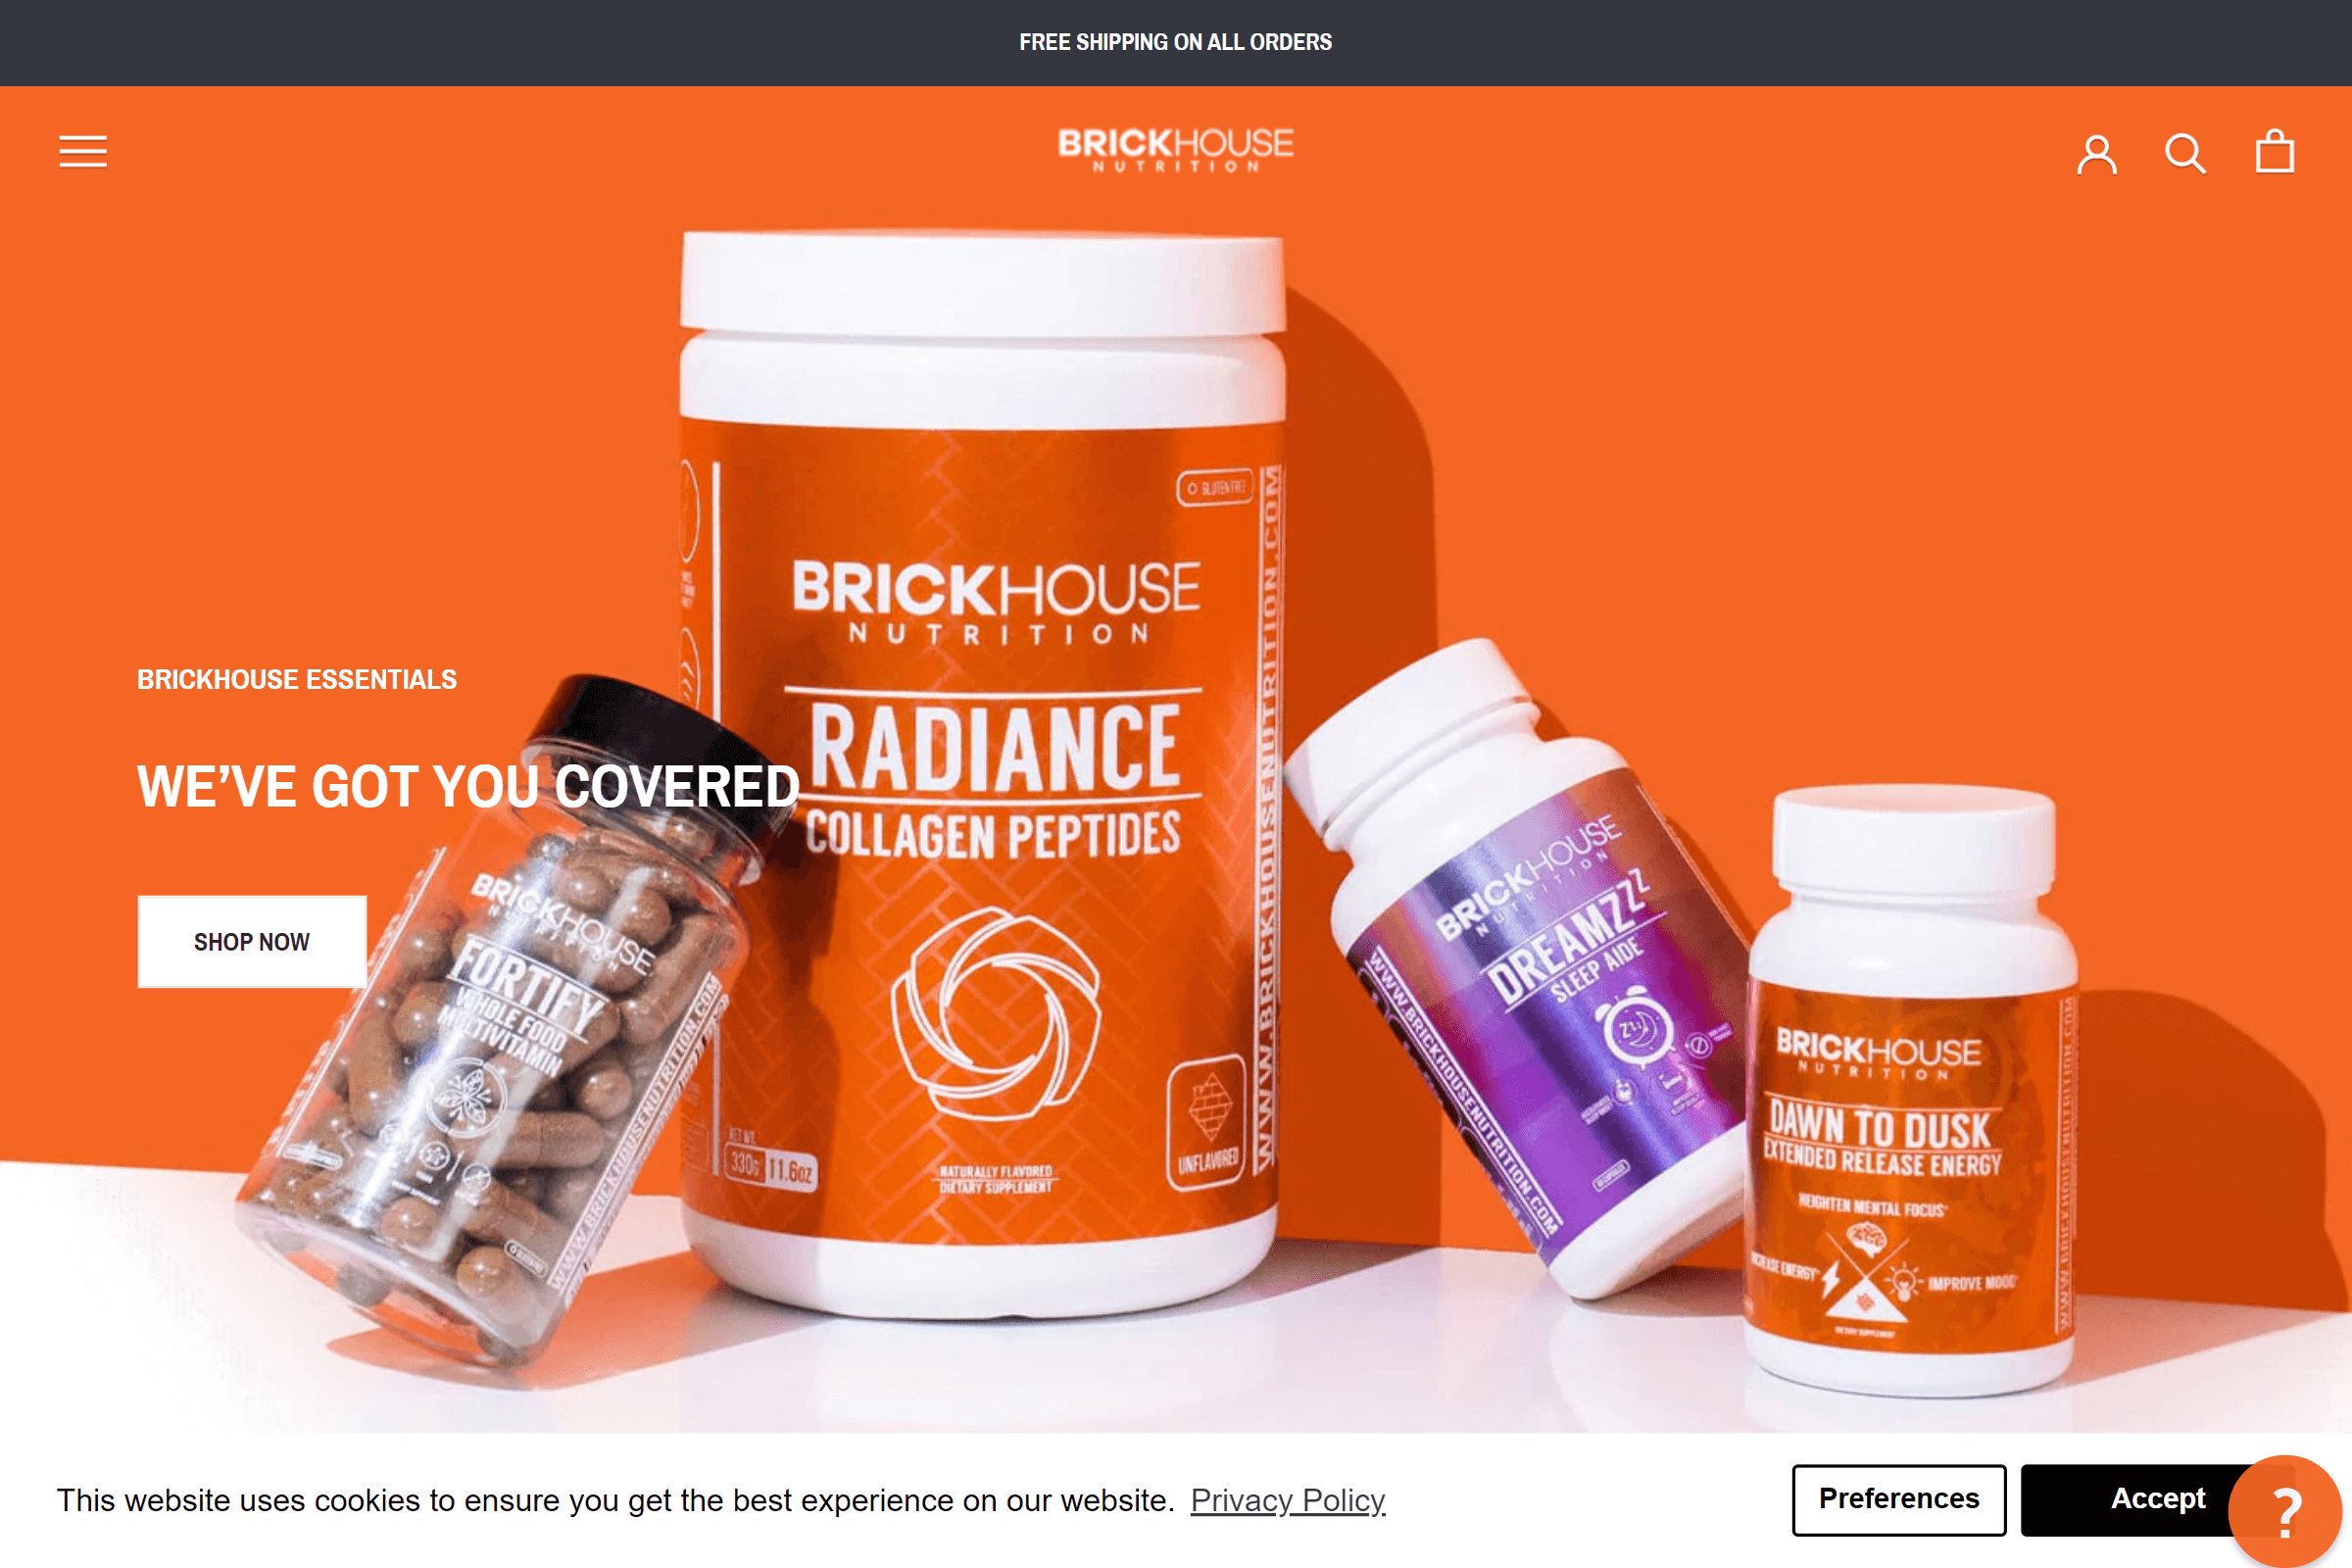 BrickHouse Nutrition on ReadSomeReviews